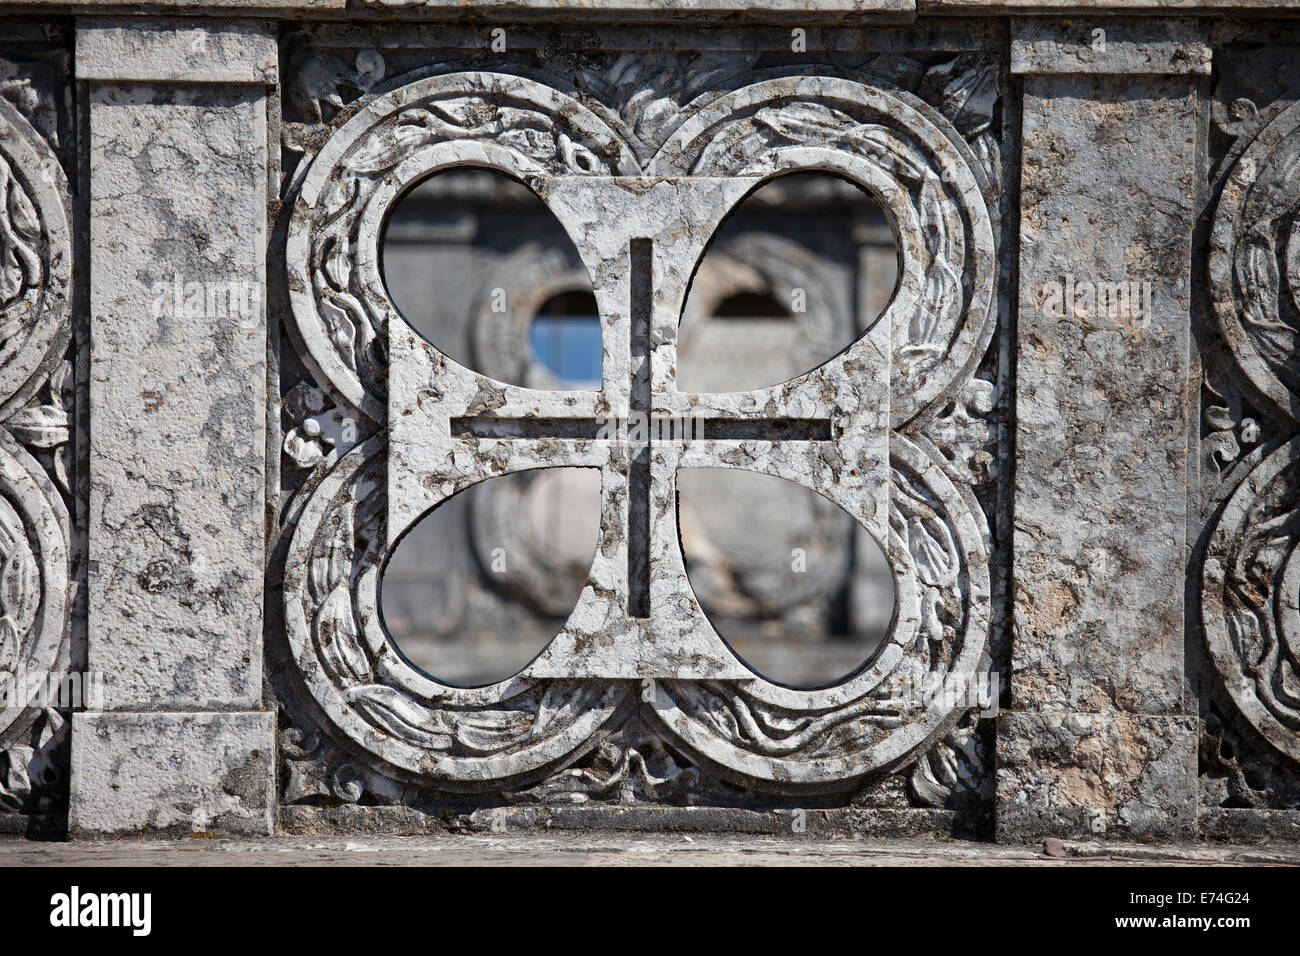 Order of Christ cross, former Knights Templar order, designed within balustrade of the Belem Tower in Lisbon, Portugal. Stock Photo